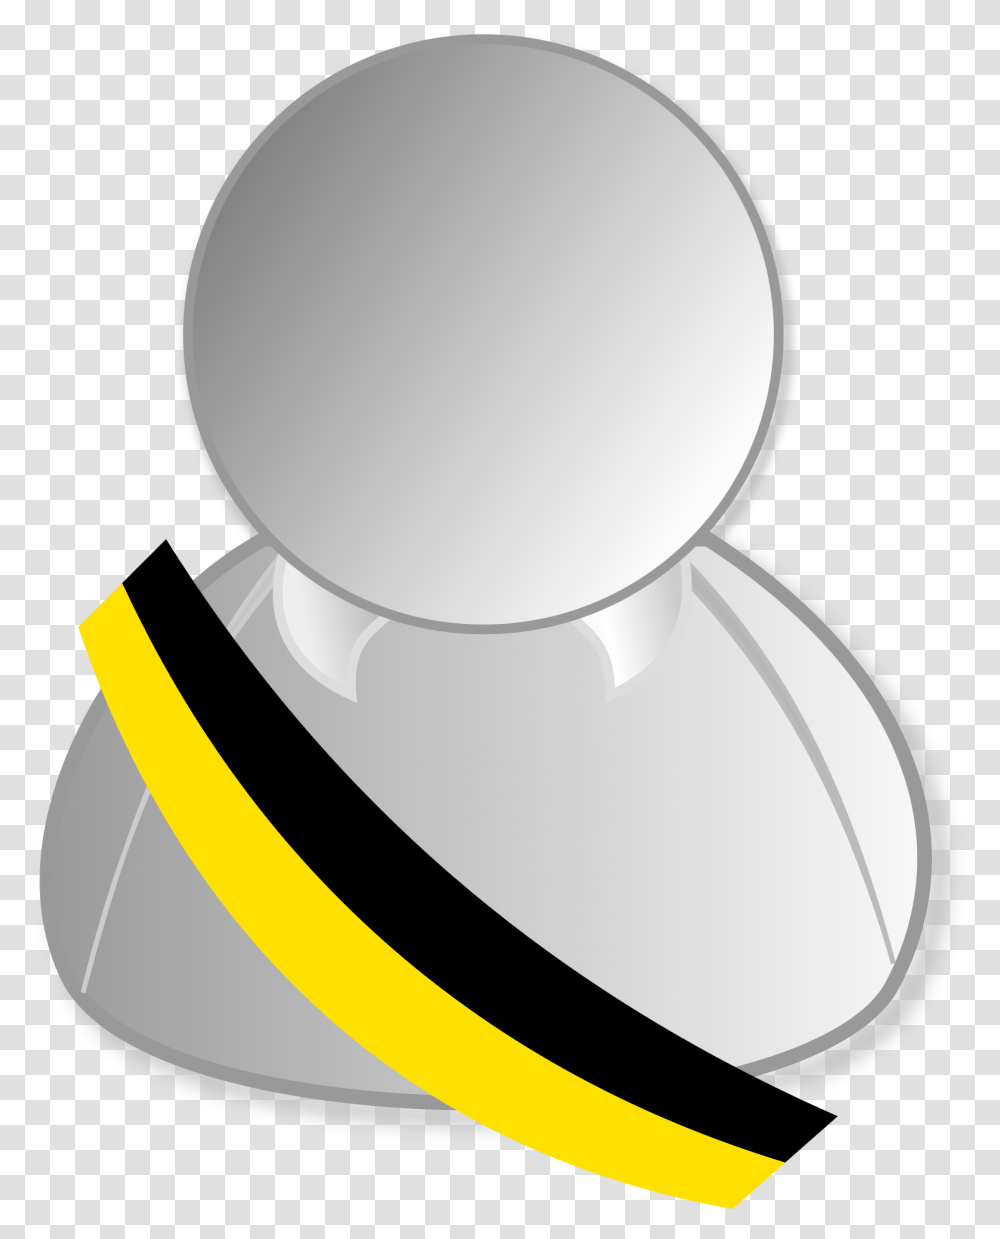 Filehabsburg Politic Personality Iconsvg Wikipedia Icon Wikipedia User, Mirror, Magnifying, Car Mirror Transparent Png